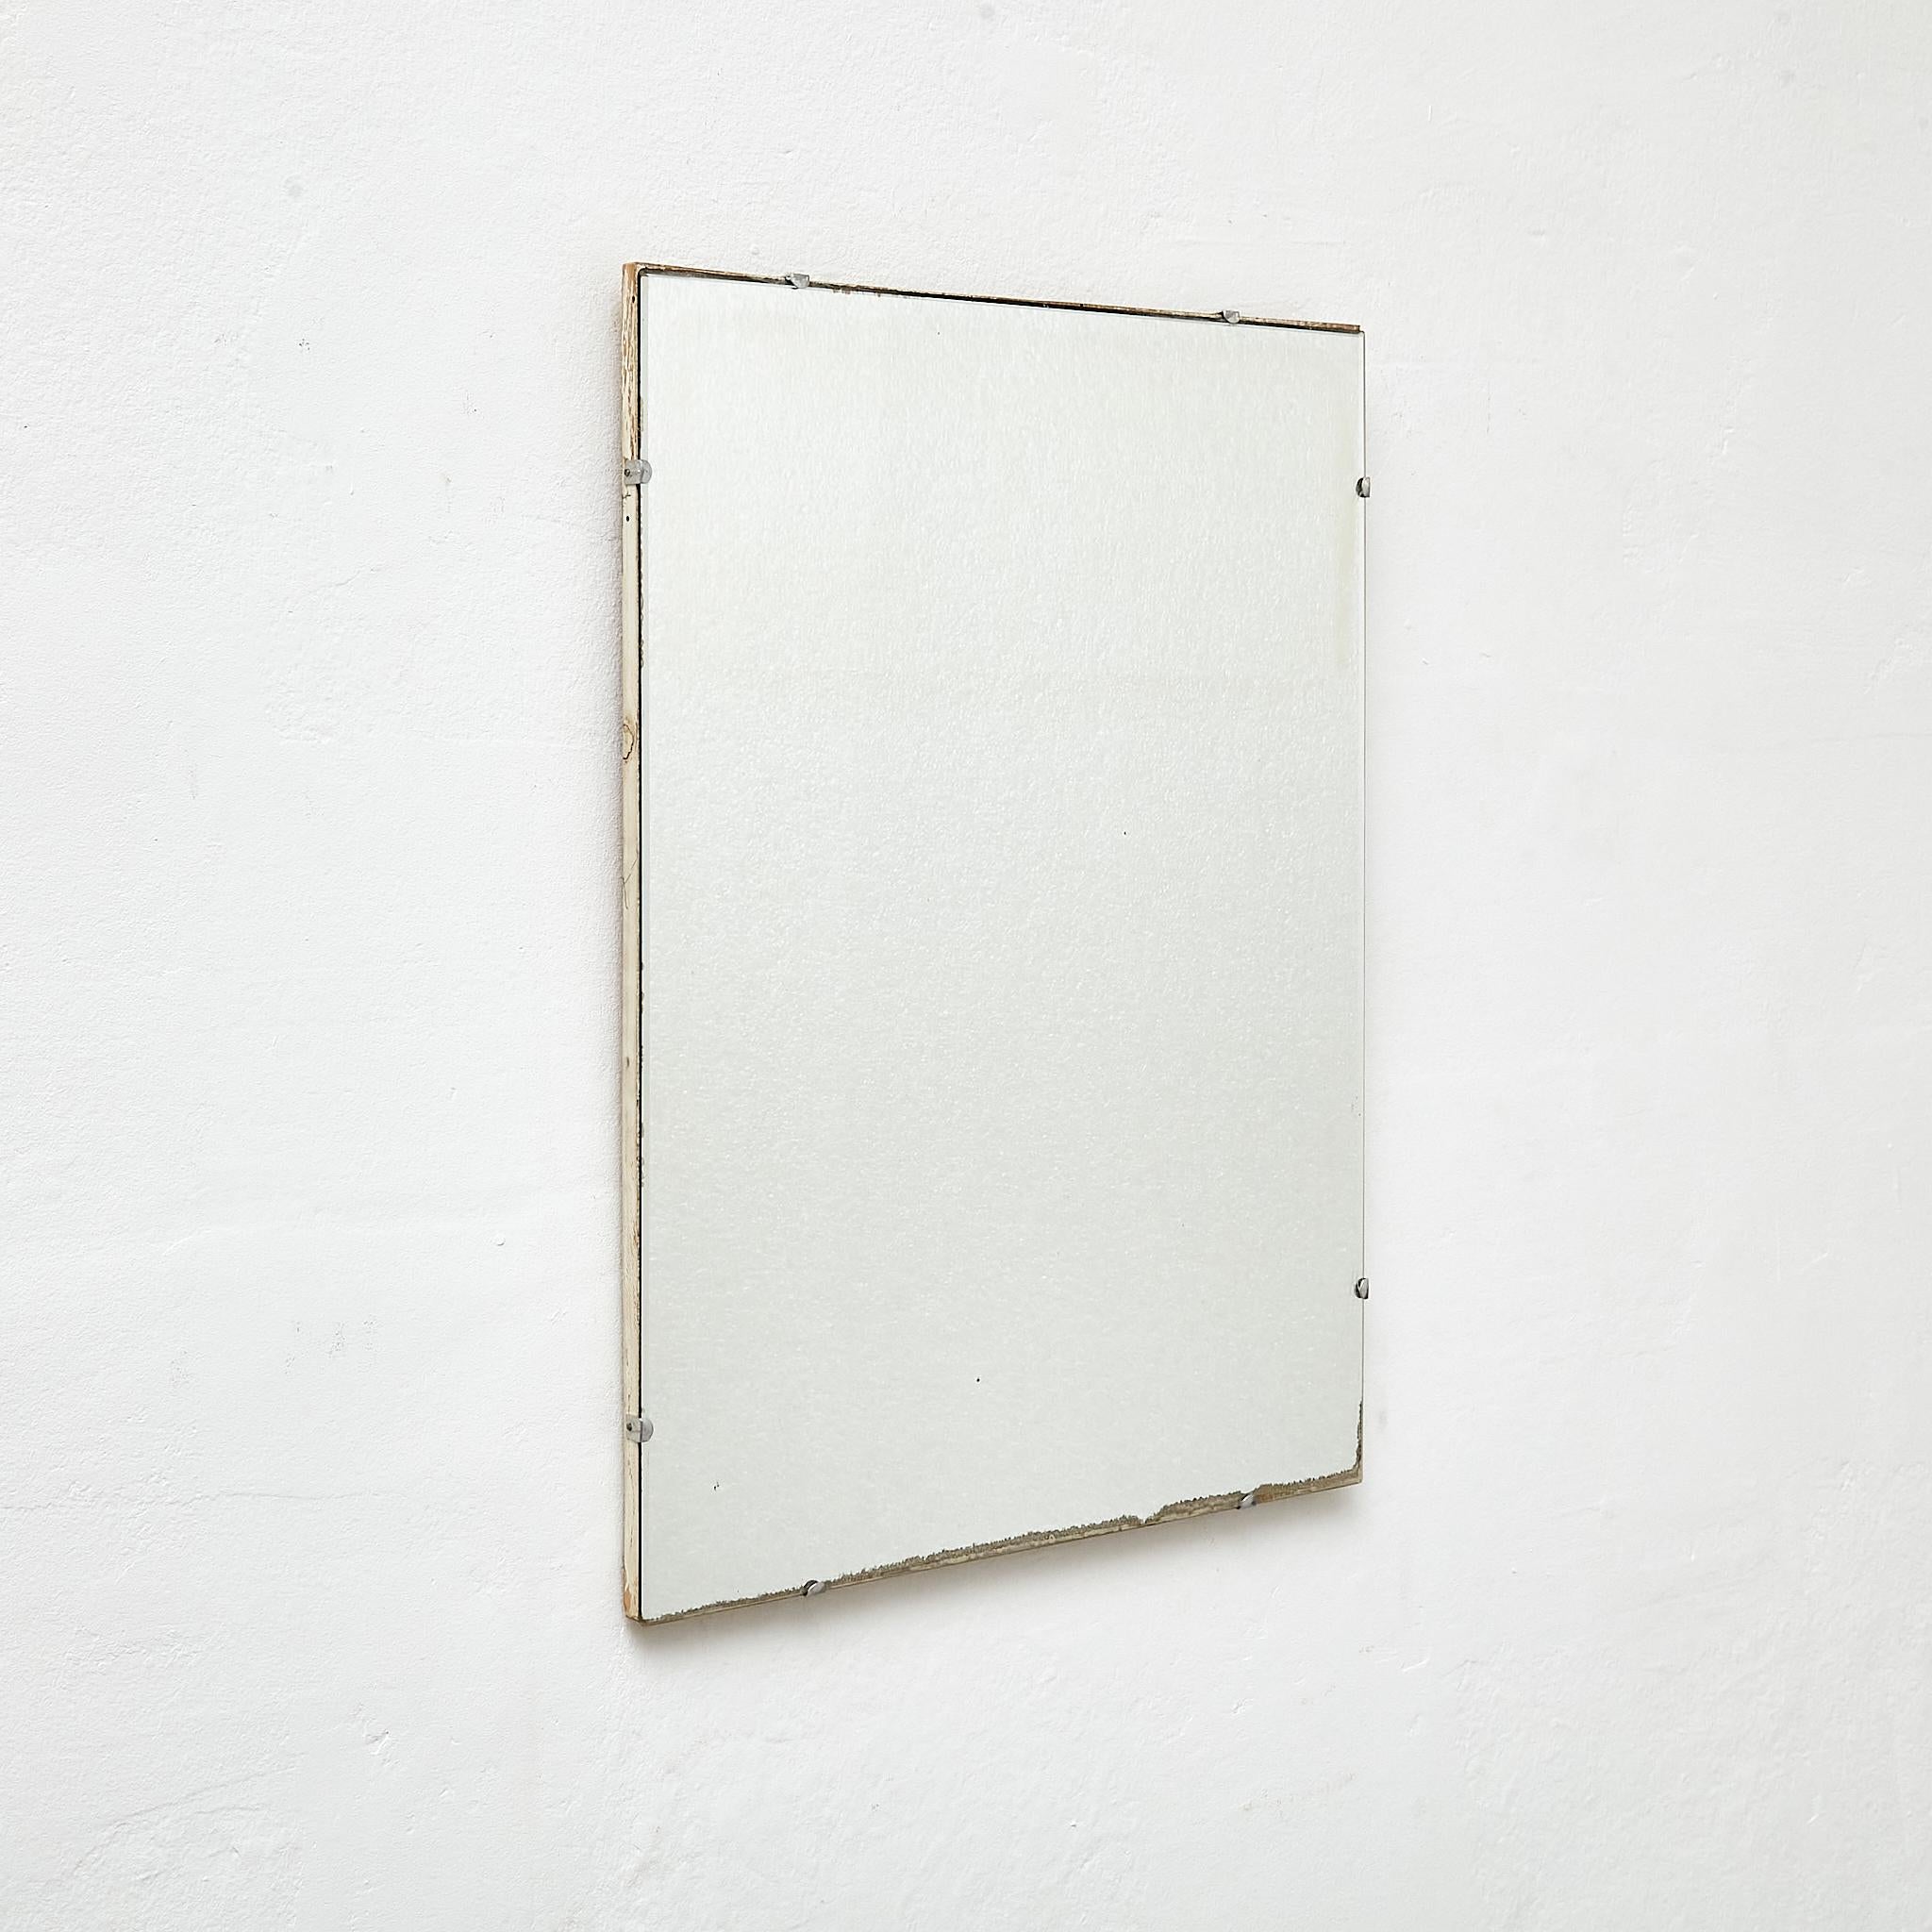 Antique Early 20th century French Wall Mirror.

Manufactured France, circa 1940.

Materials:
Wood, mirror

Dimensions: 
D 2 x W 45 cm x H 60.5 cm

In original condition, with minor wear consistent with age and use, preserving a beautiful